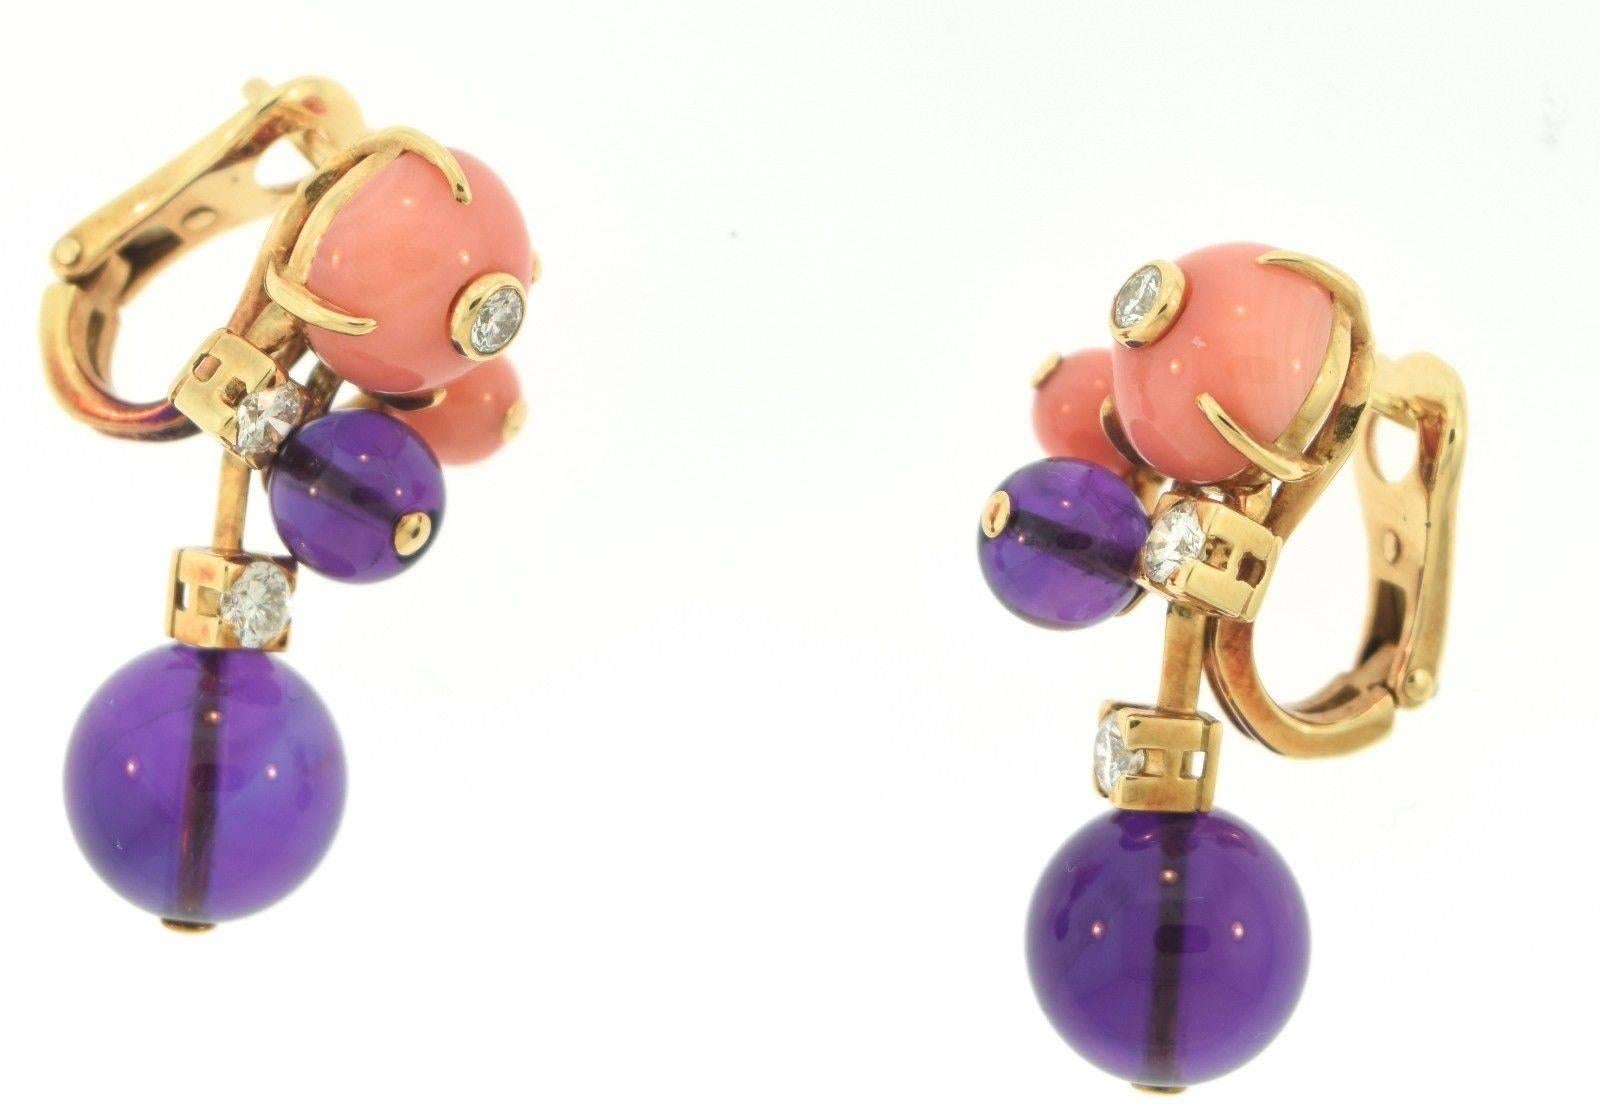 Cartier Delices De Goa Diamond Amethyst & Coral Earrings

A beautiful pair of earrings signed the Maison Cartier model 